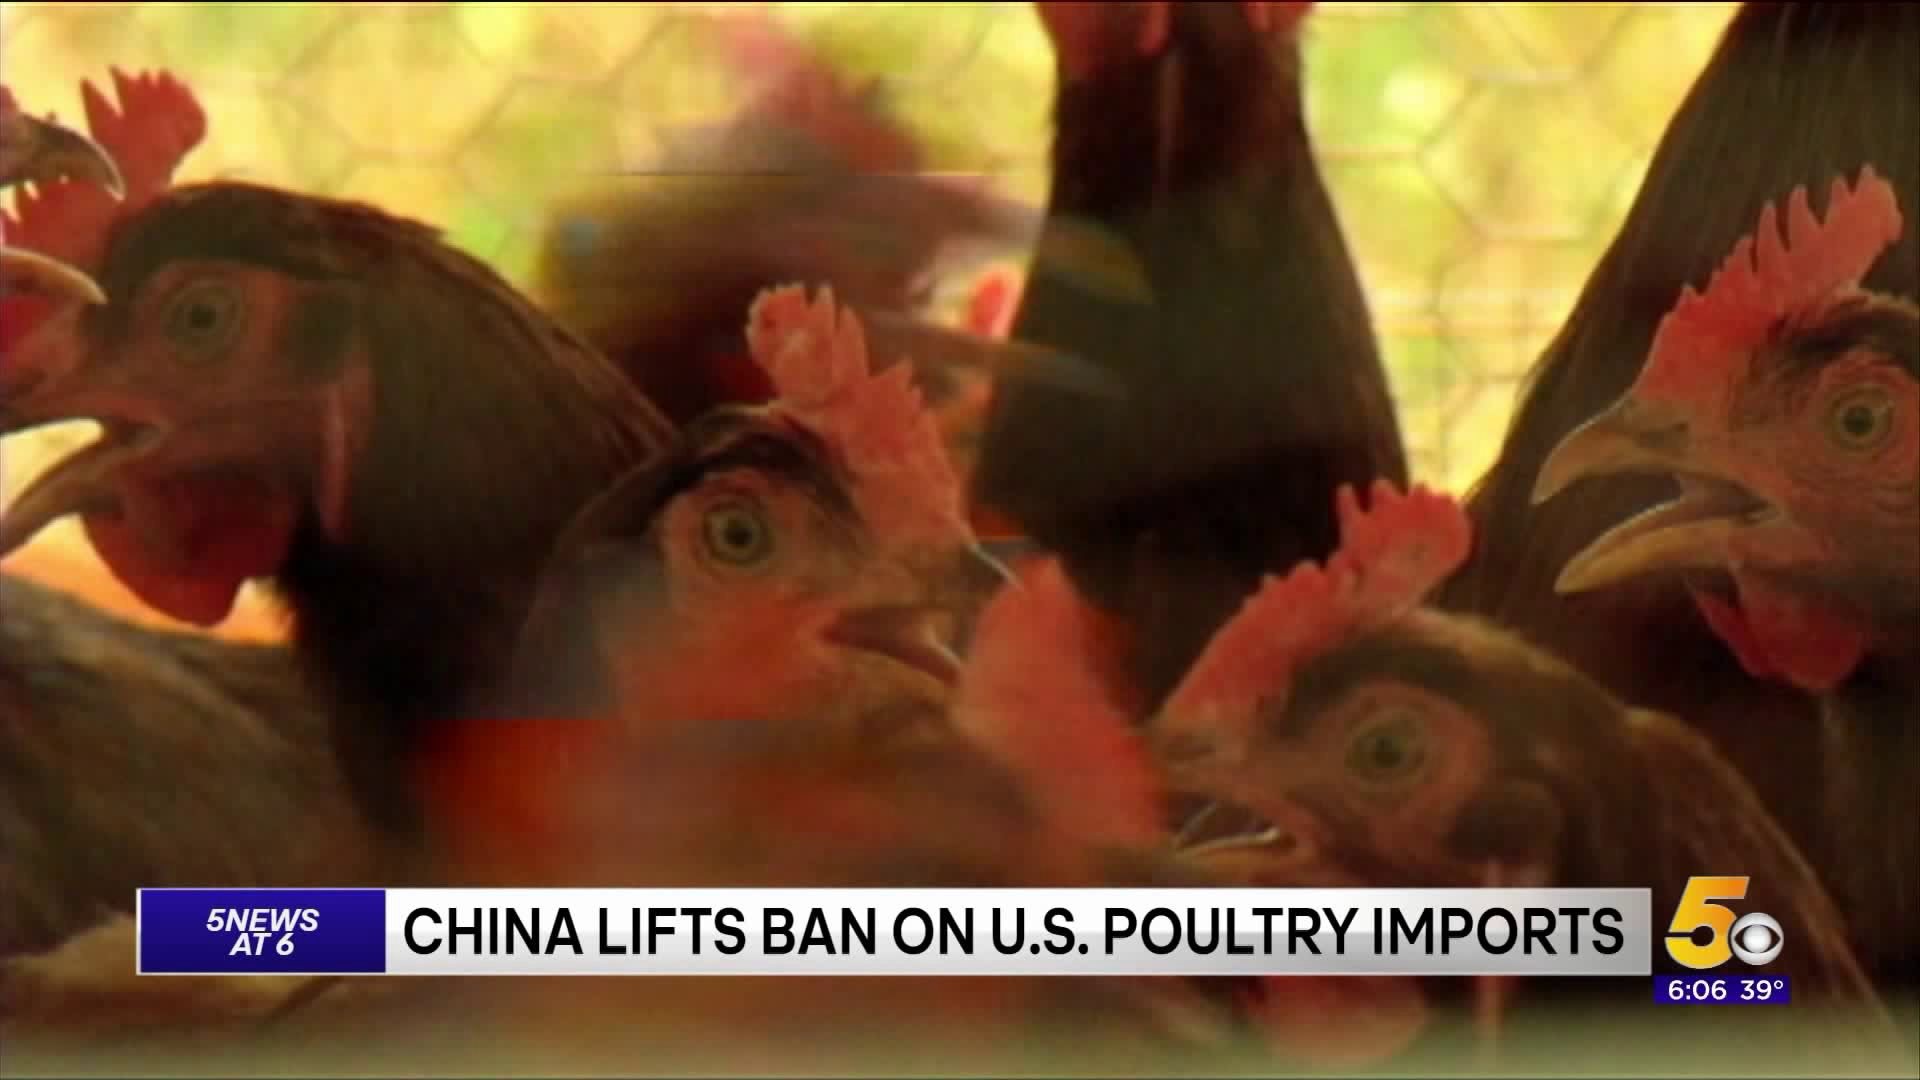 China Lifts Ban On U.S. Poultry Imports